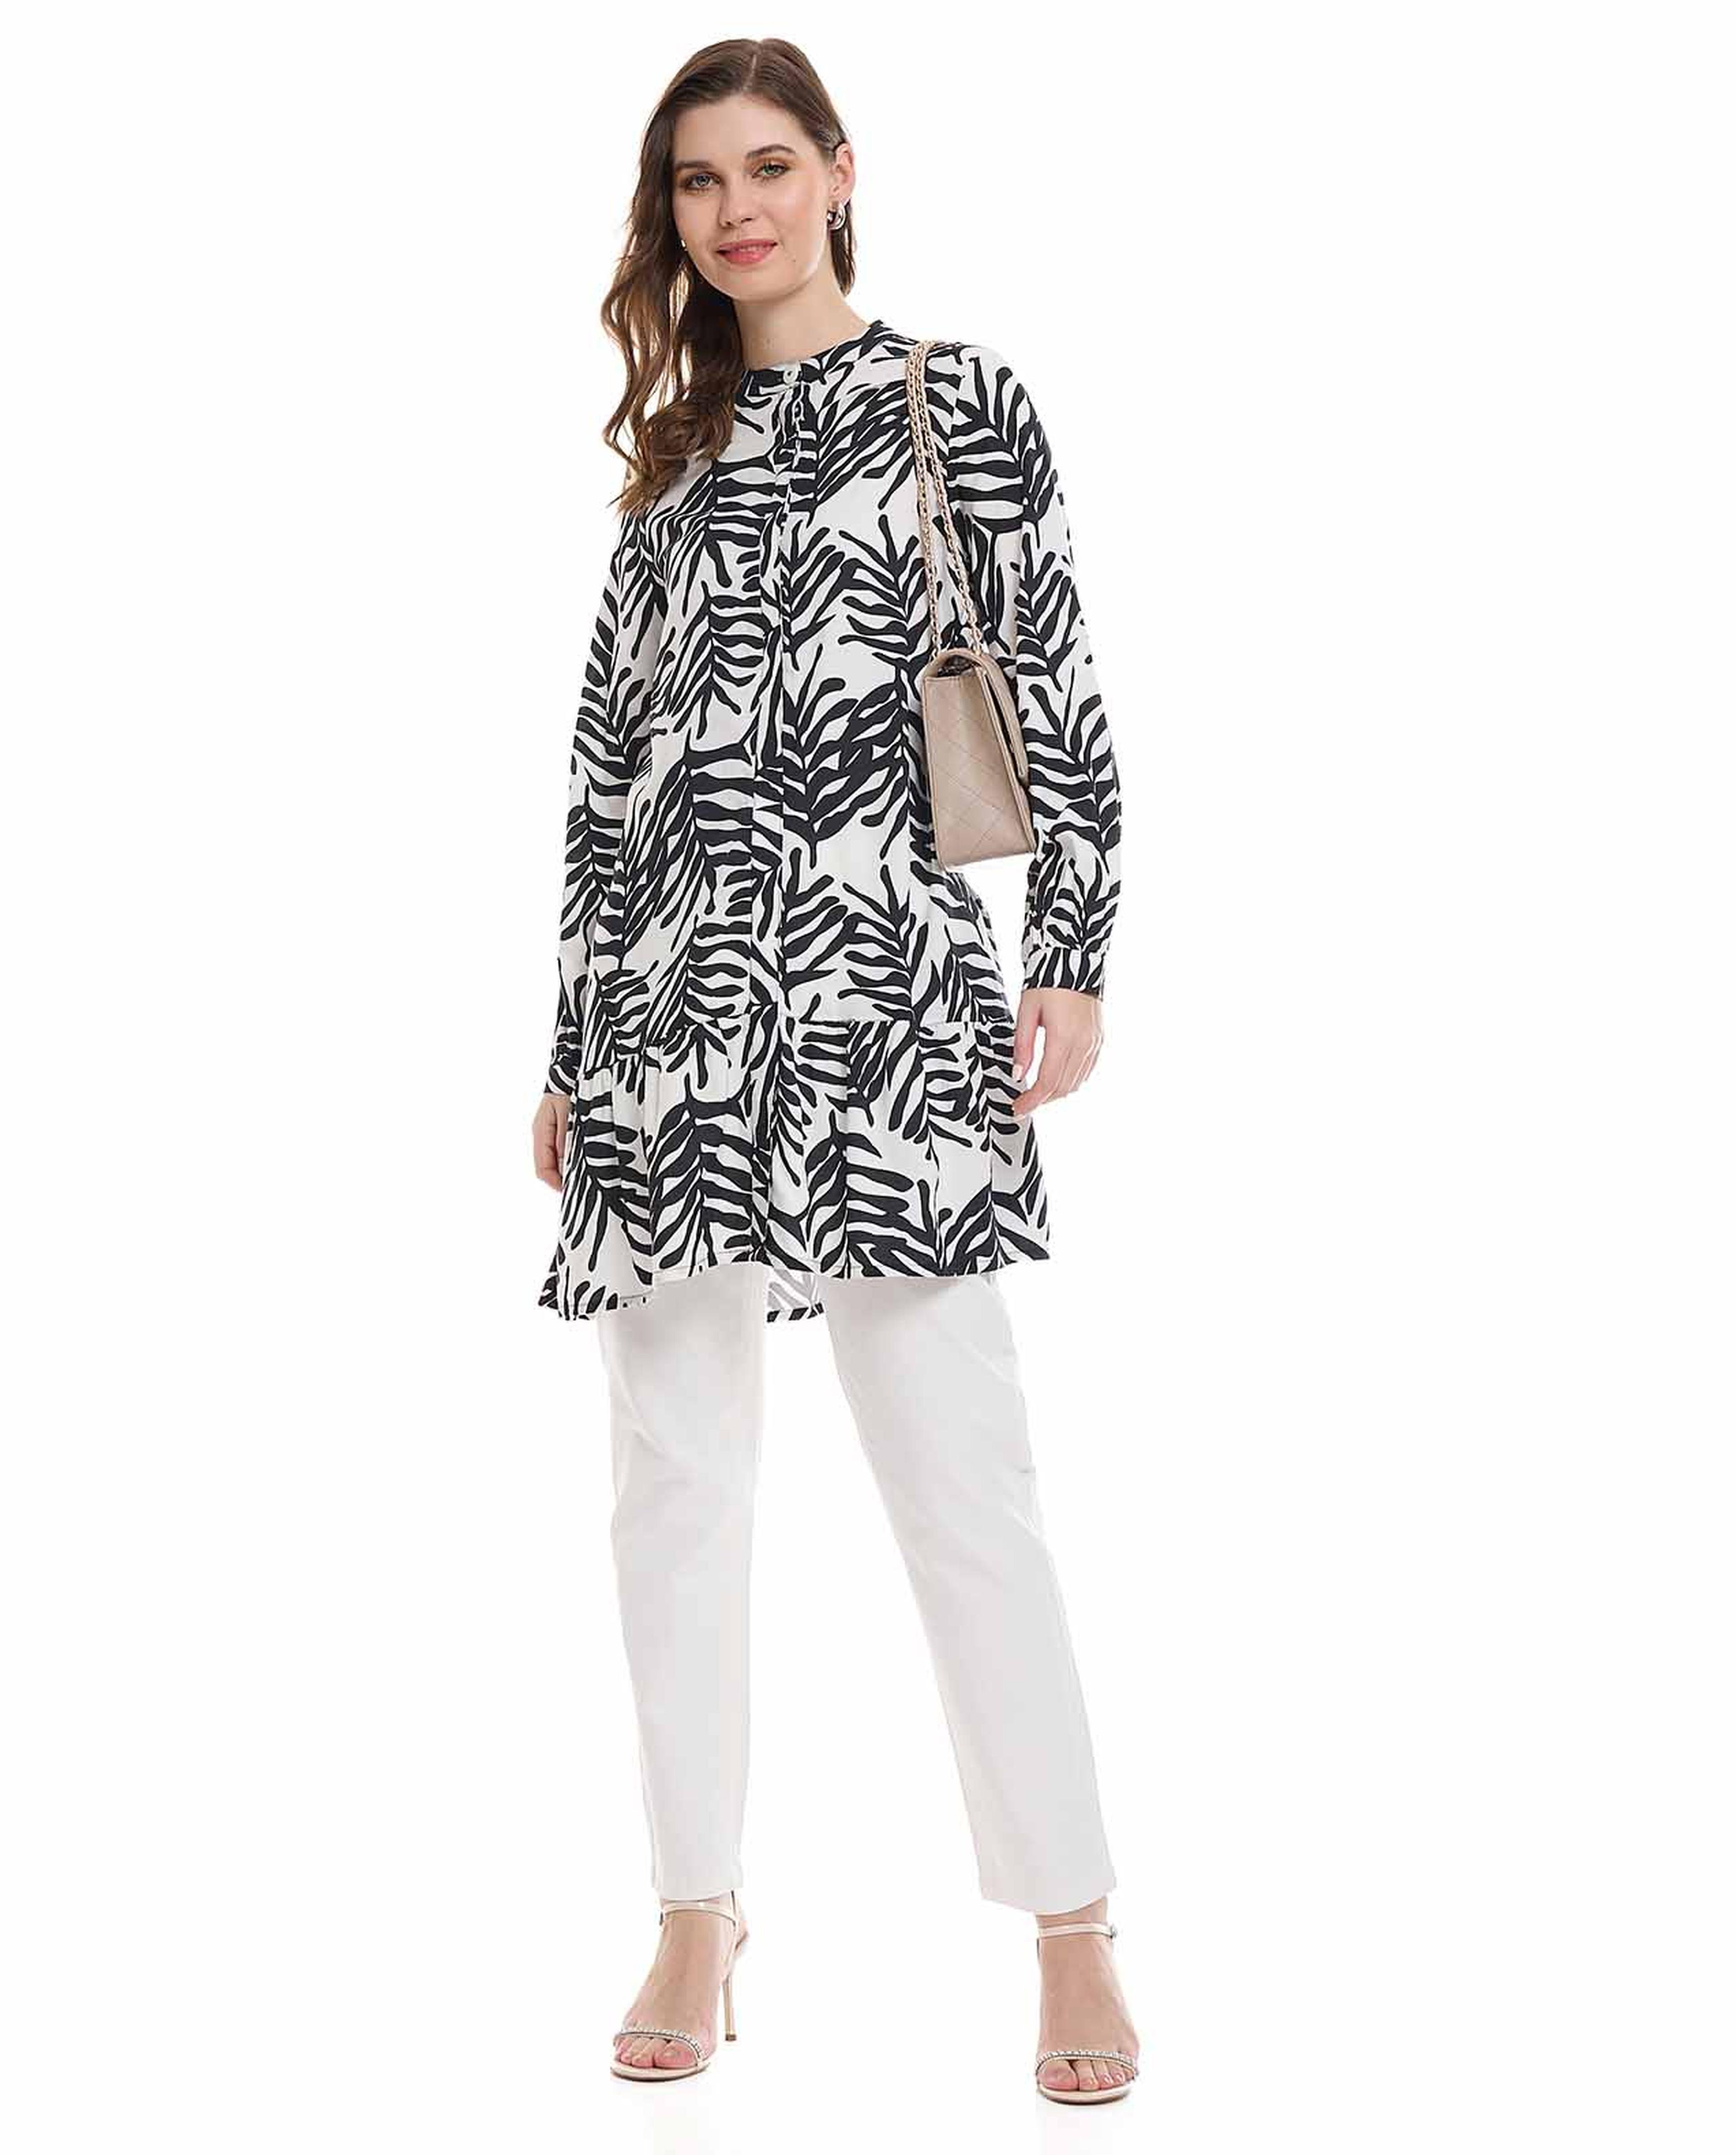 Patterned Tunic with Stand Collar and Long Sleeves